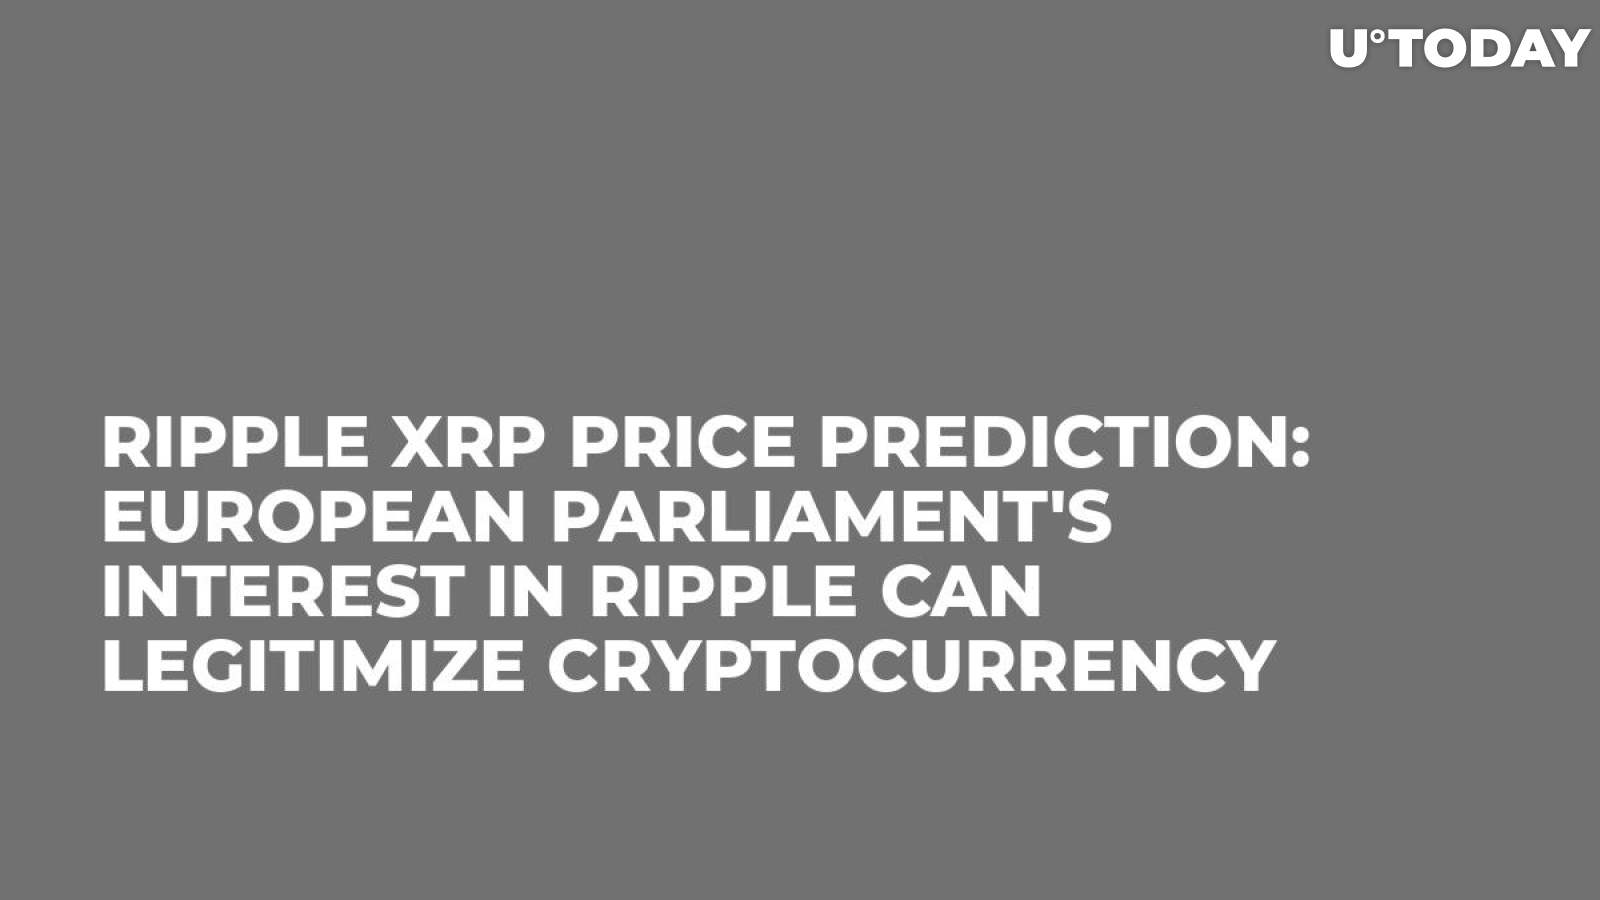 Ripple XRP Price Prediction: European Parliament's Interest in Ripple Can Legitimize Cryptocurrency